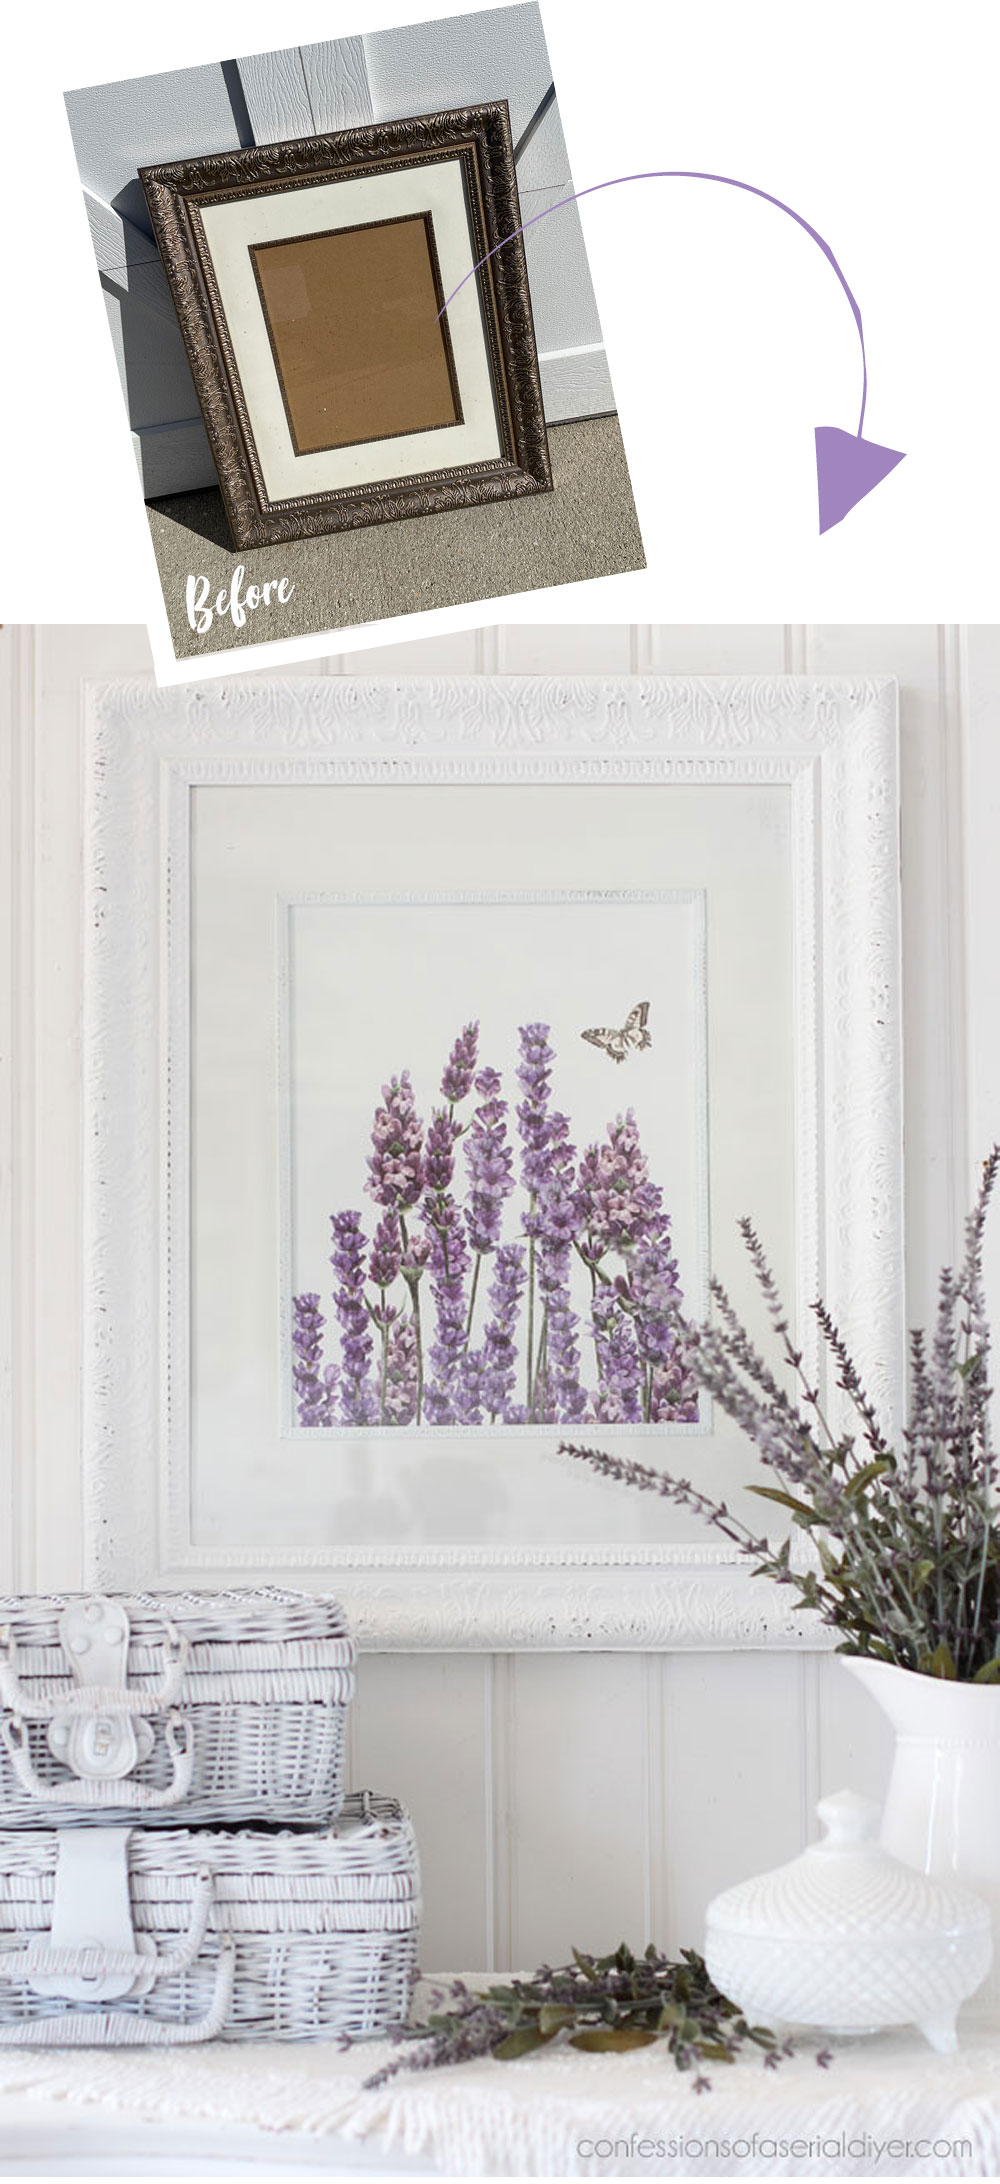 Create new Wall art from Old Frames with transfers